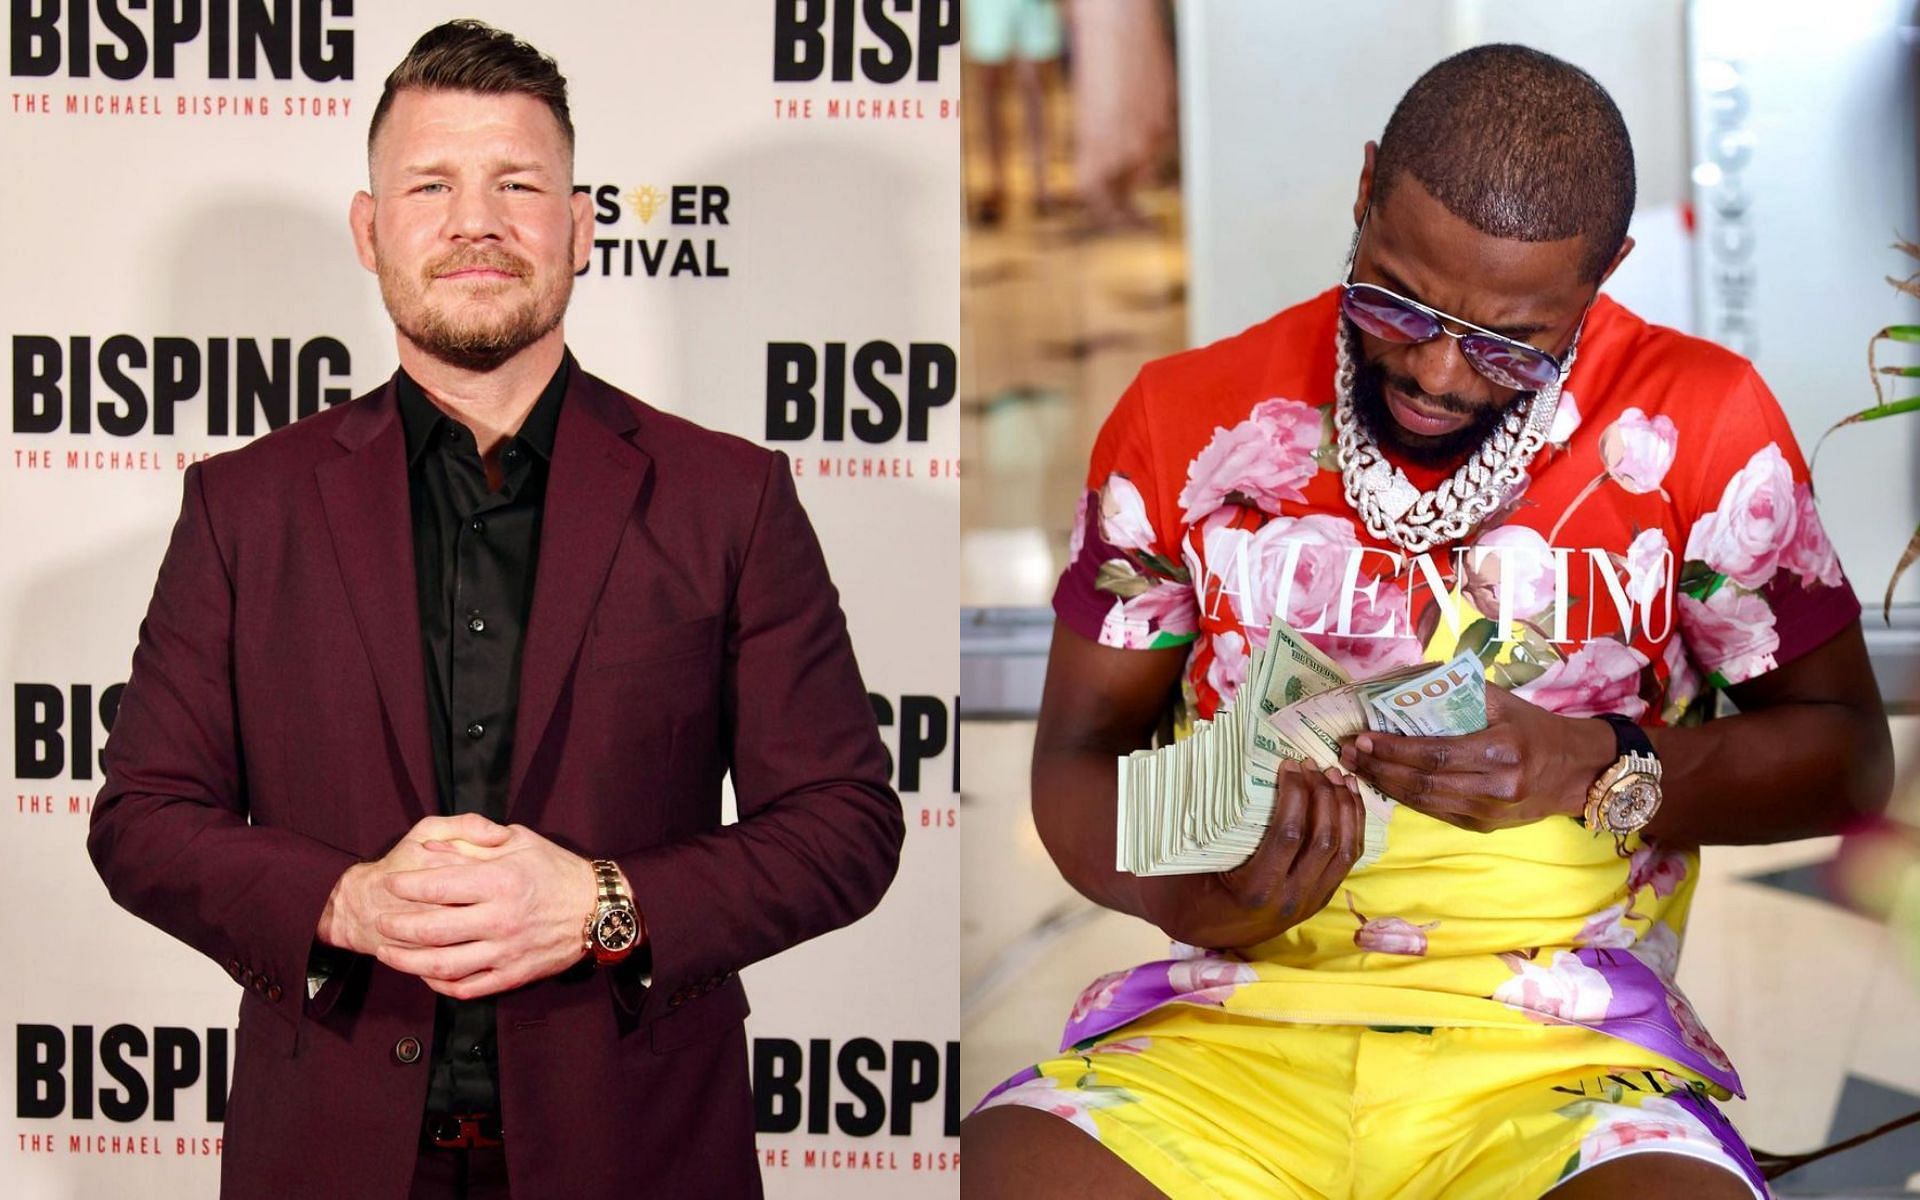 Michael Bisping (left), Floyd Mayweather (right) [Image courtesy: @mikebisping and @floydmayweather via Instagram]